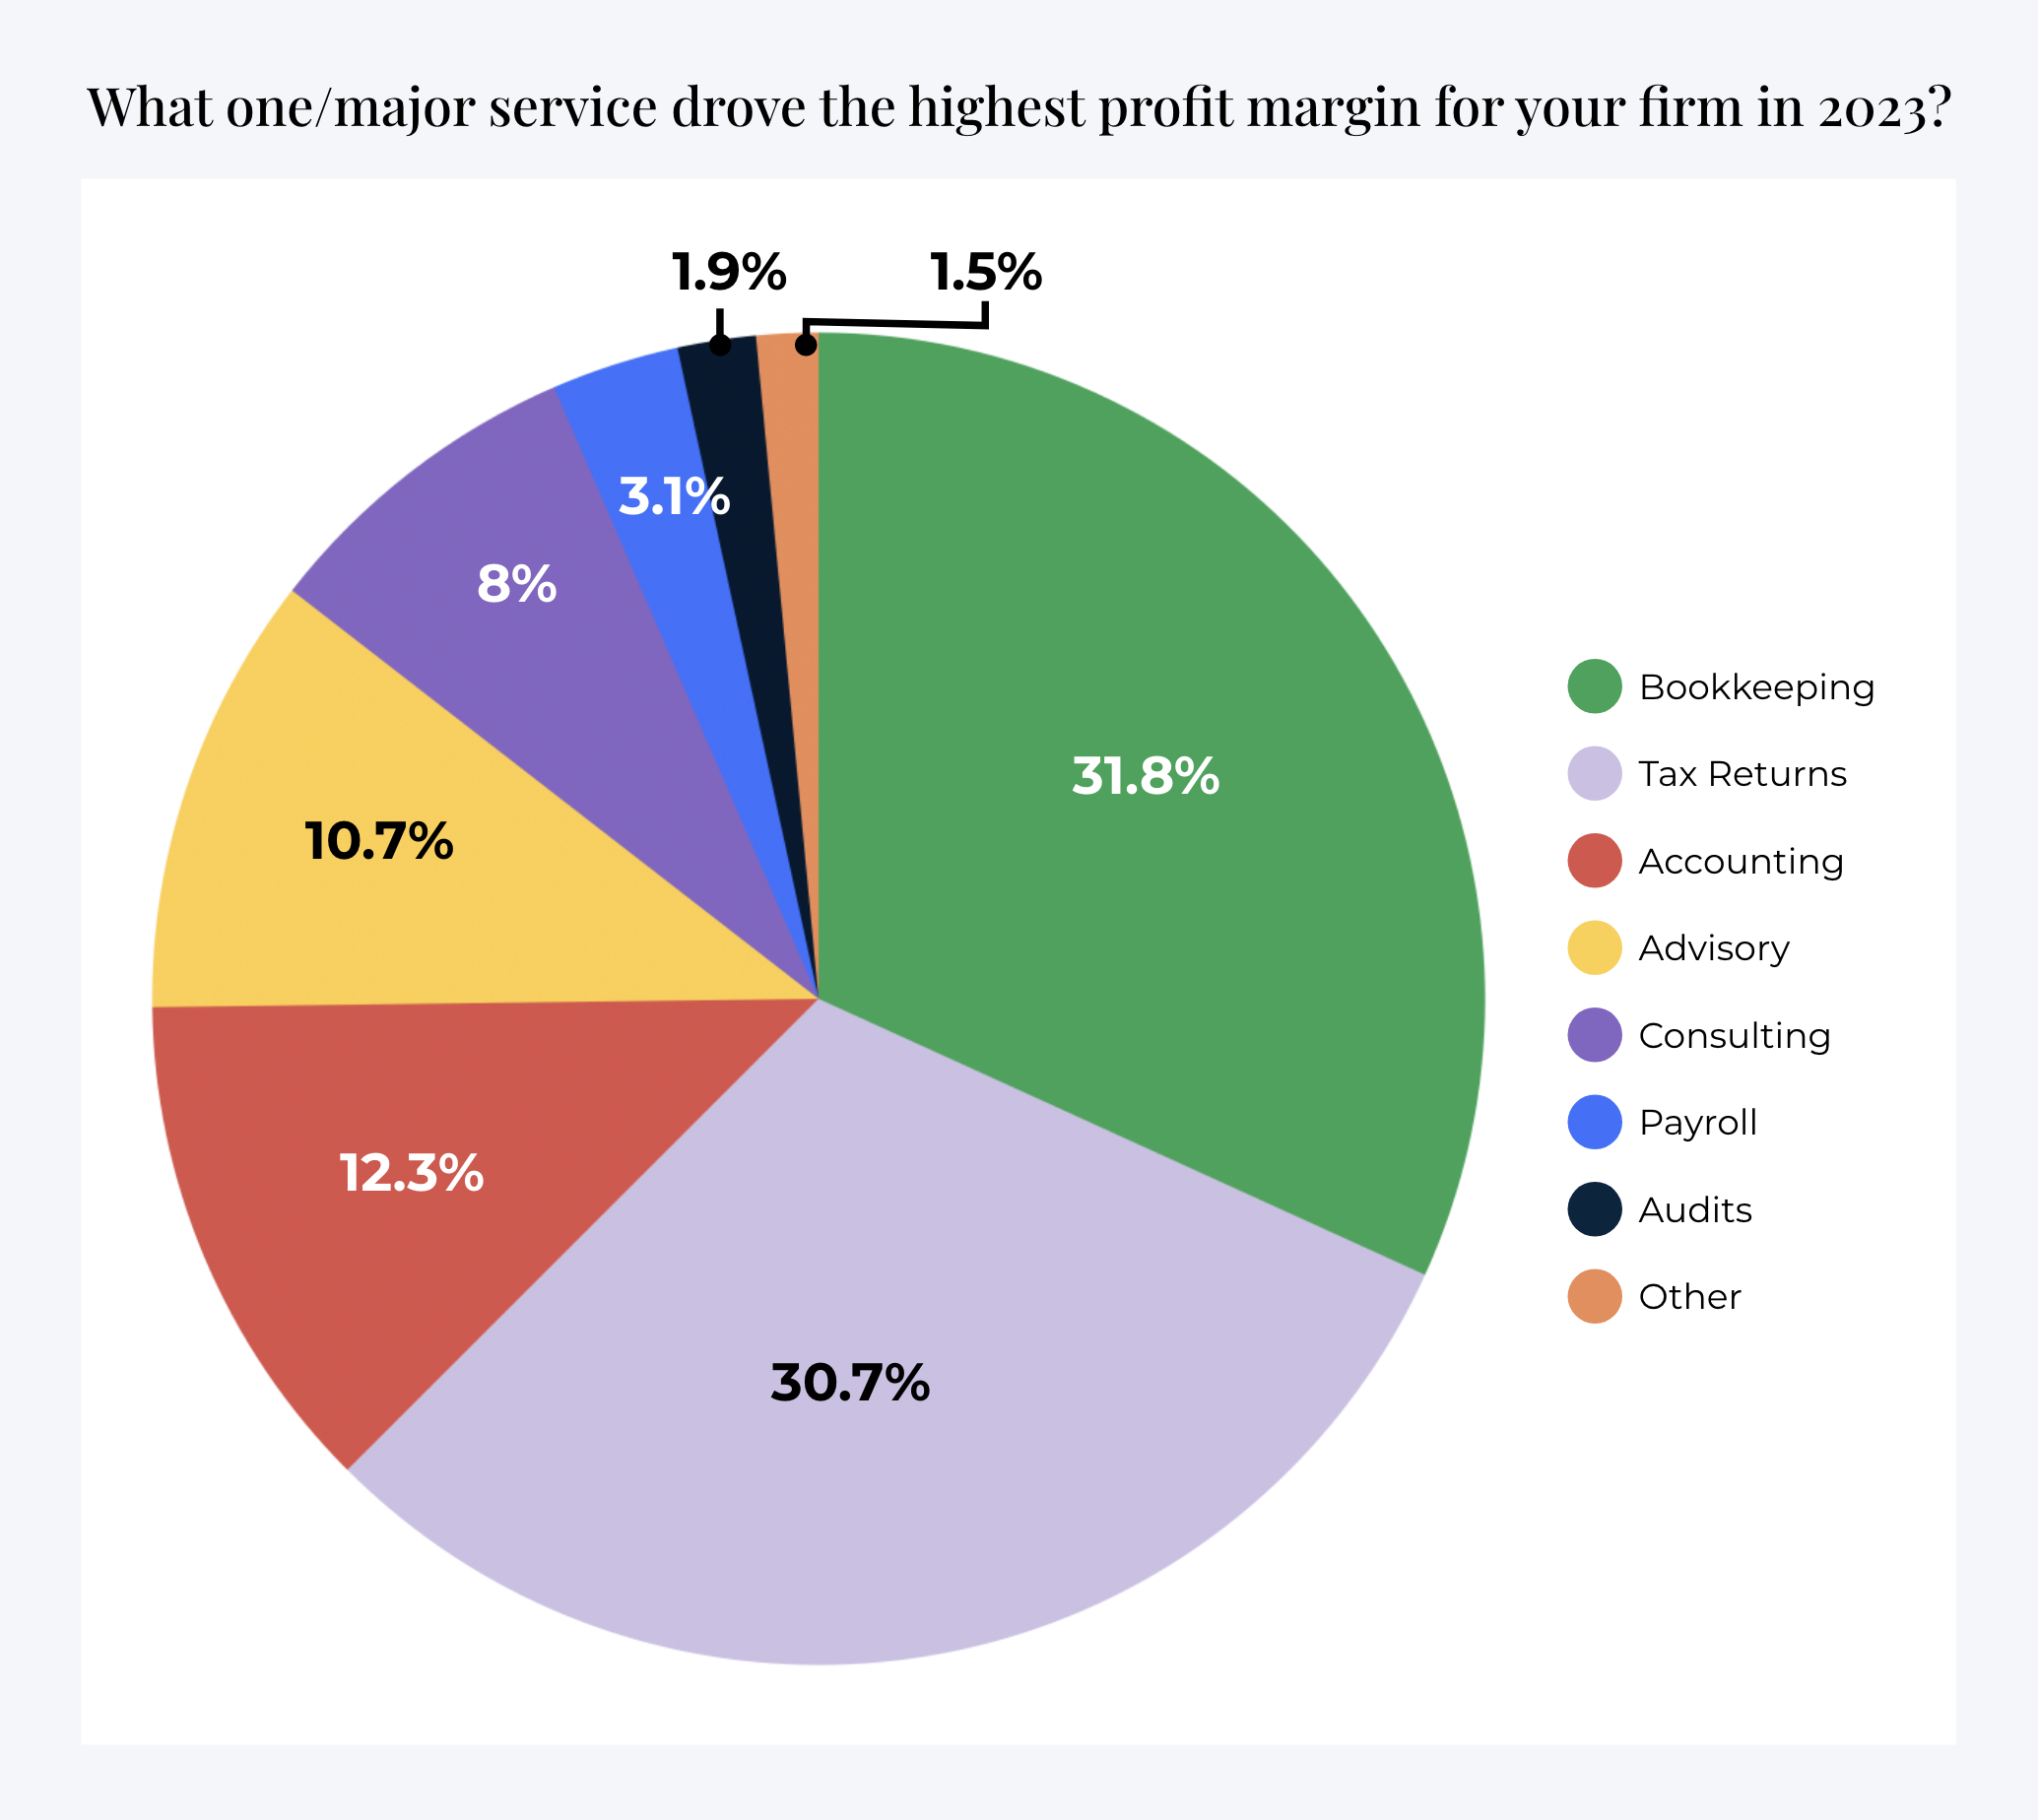 services that drove the highest profit margins for accounting and bookkeeping firms in 2023